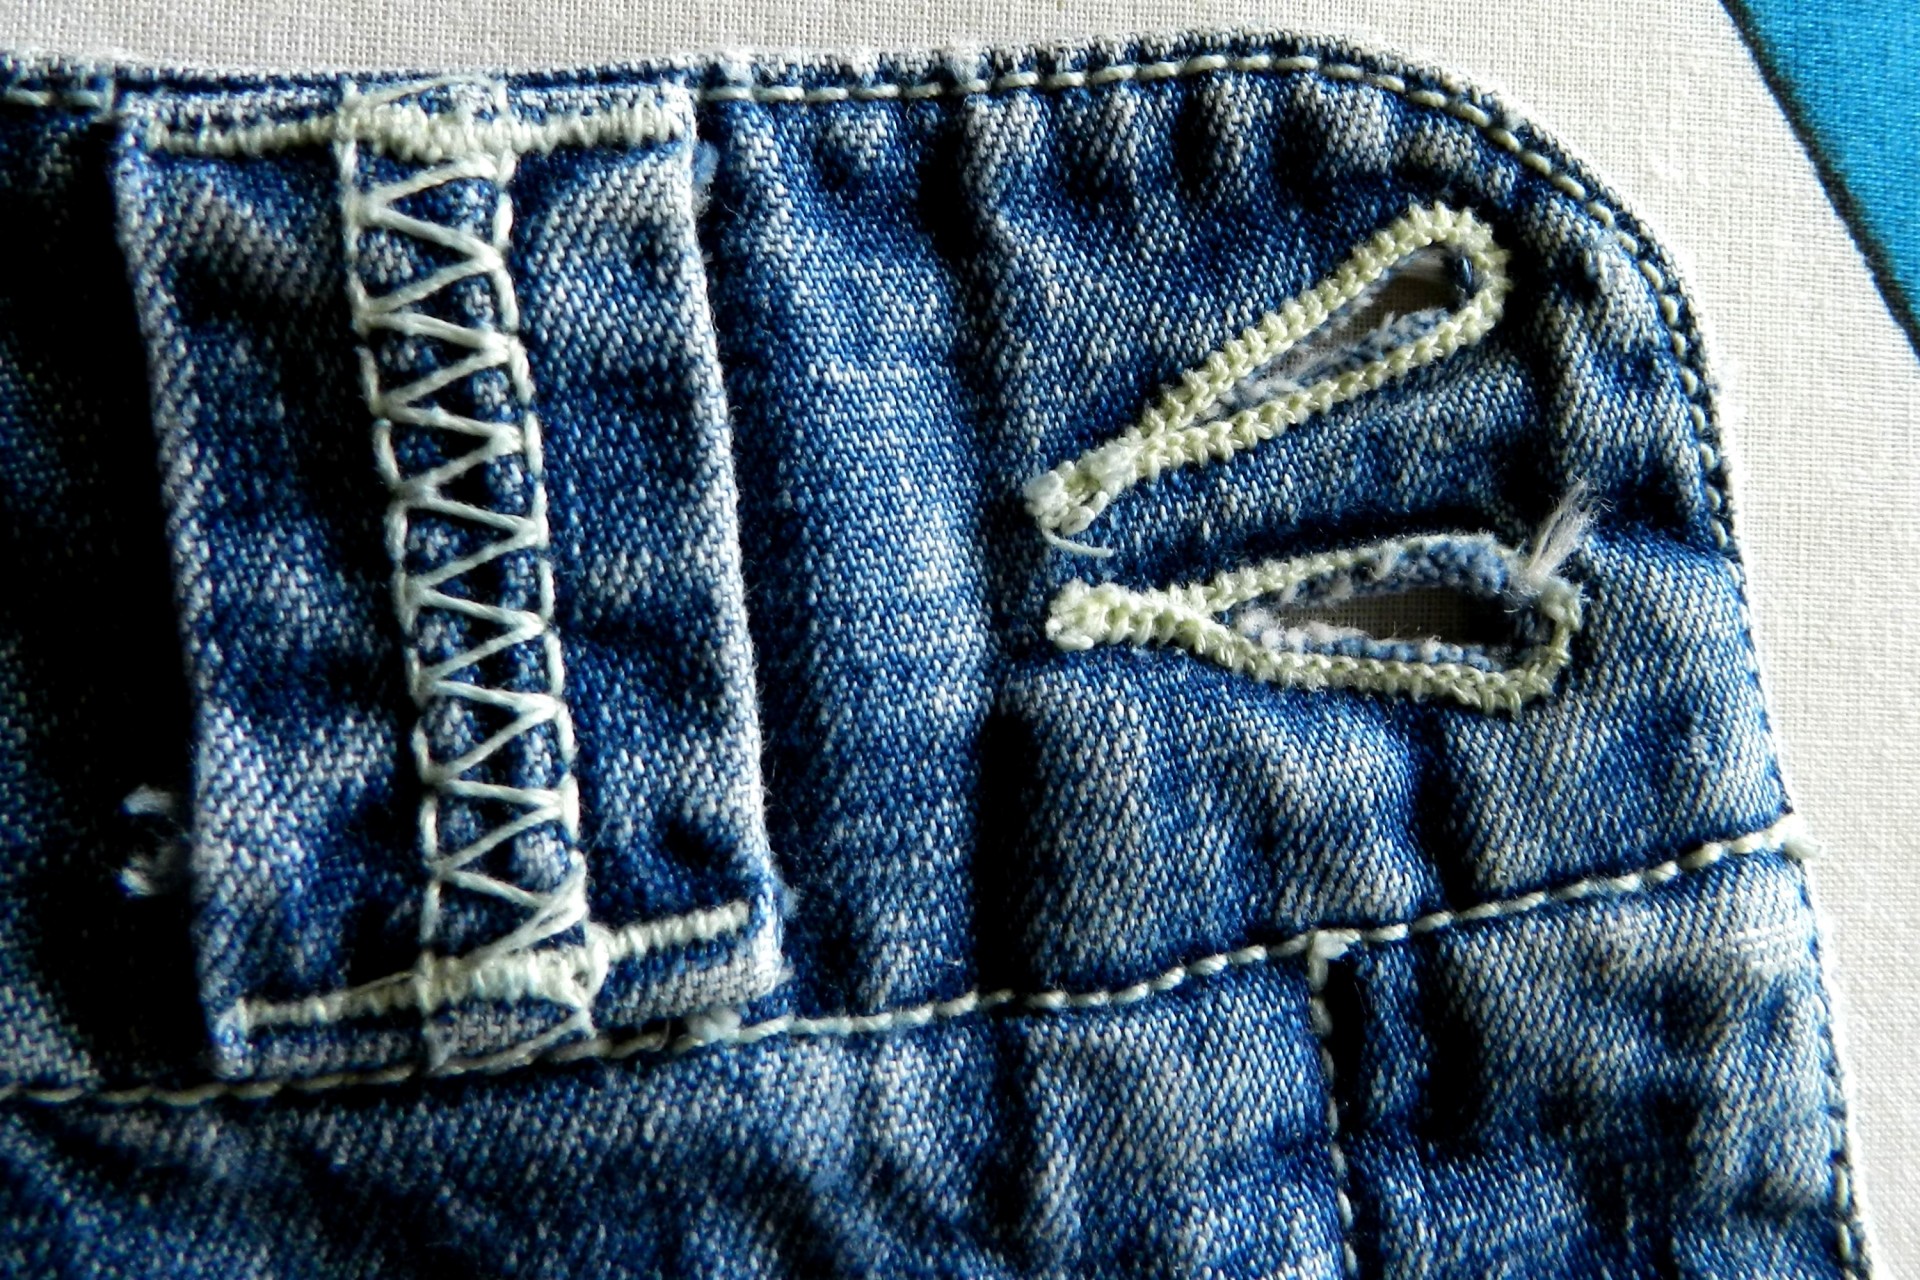 jeans-2014-1-free-stock-photo-public-domain-pictures